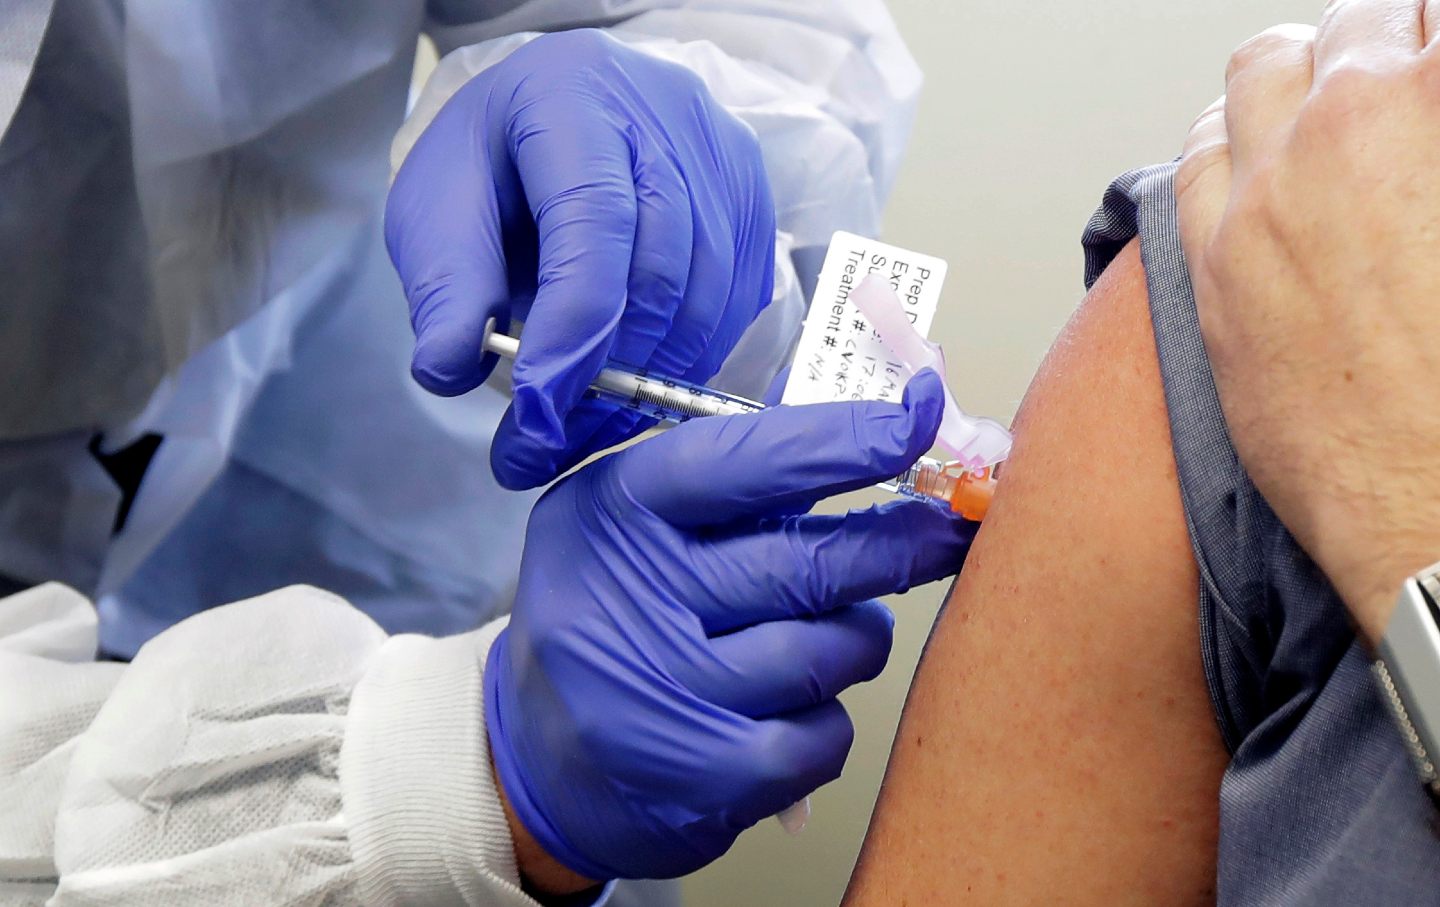 A person wearing gloves injects another person with a potential Covid-19 vaccine.